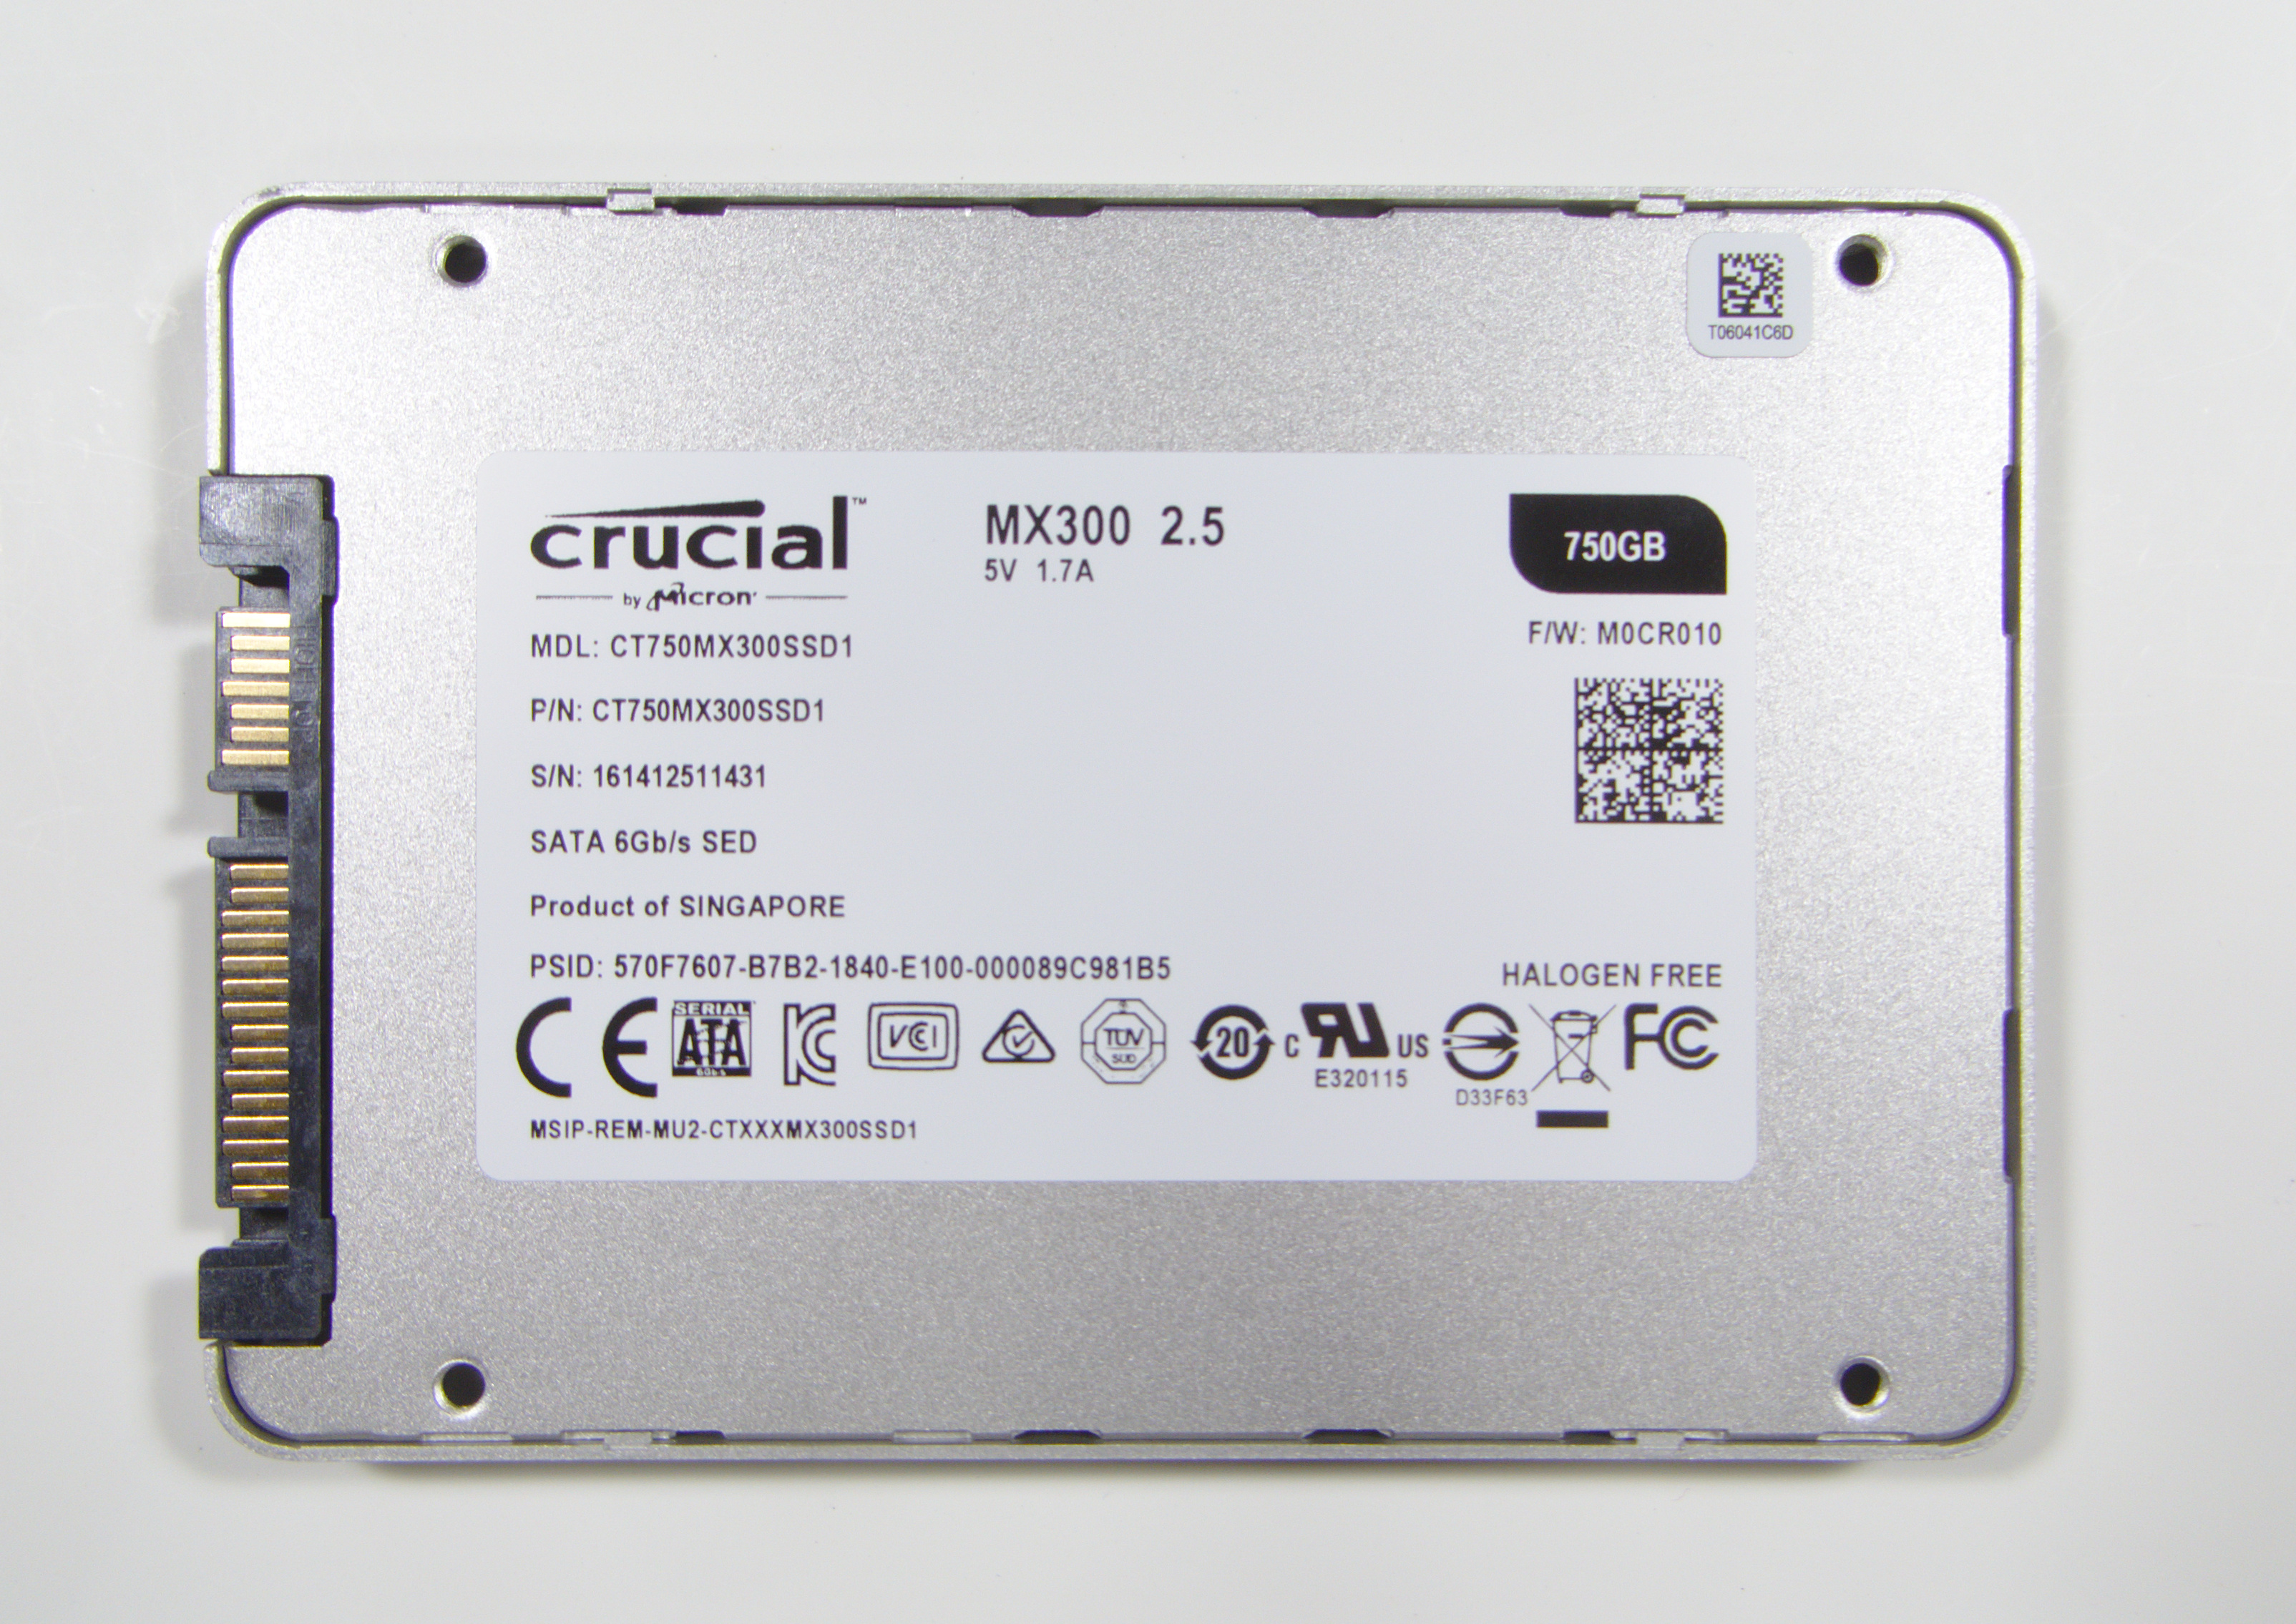 Vidner knoglebrud Spytte ud Conclusions and Final Words - The Crucial MX300 750GB SSD Review: Micron's  3D NAND Arrives